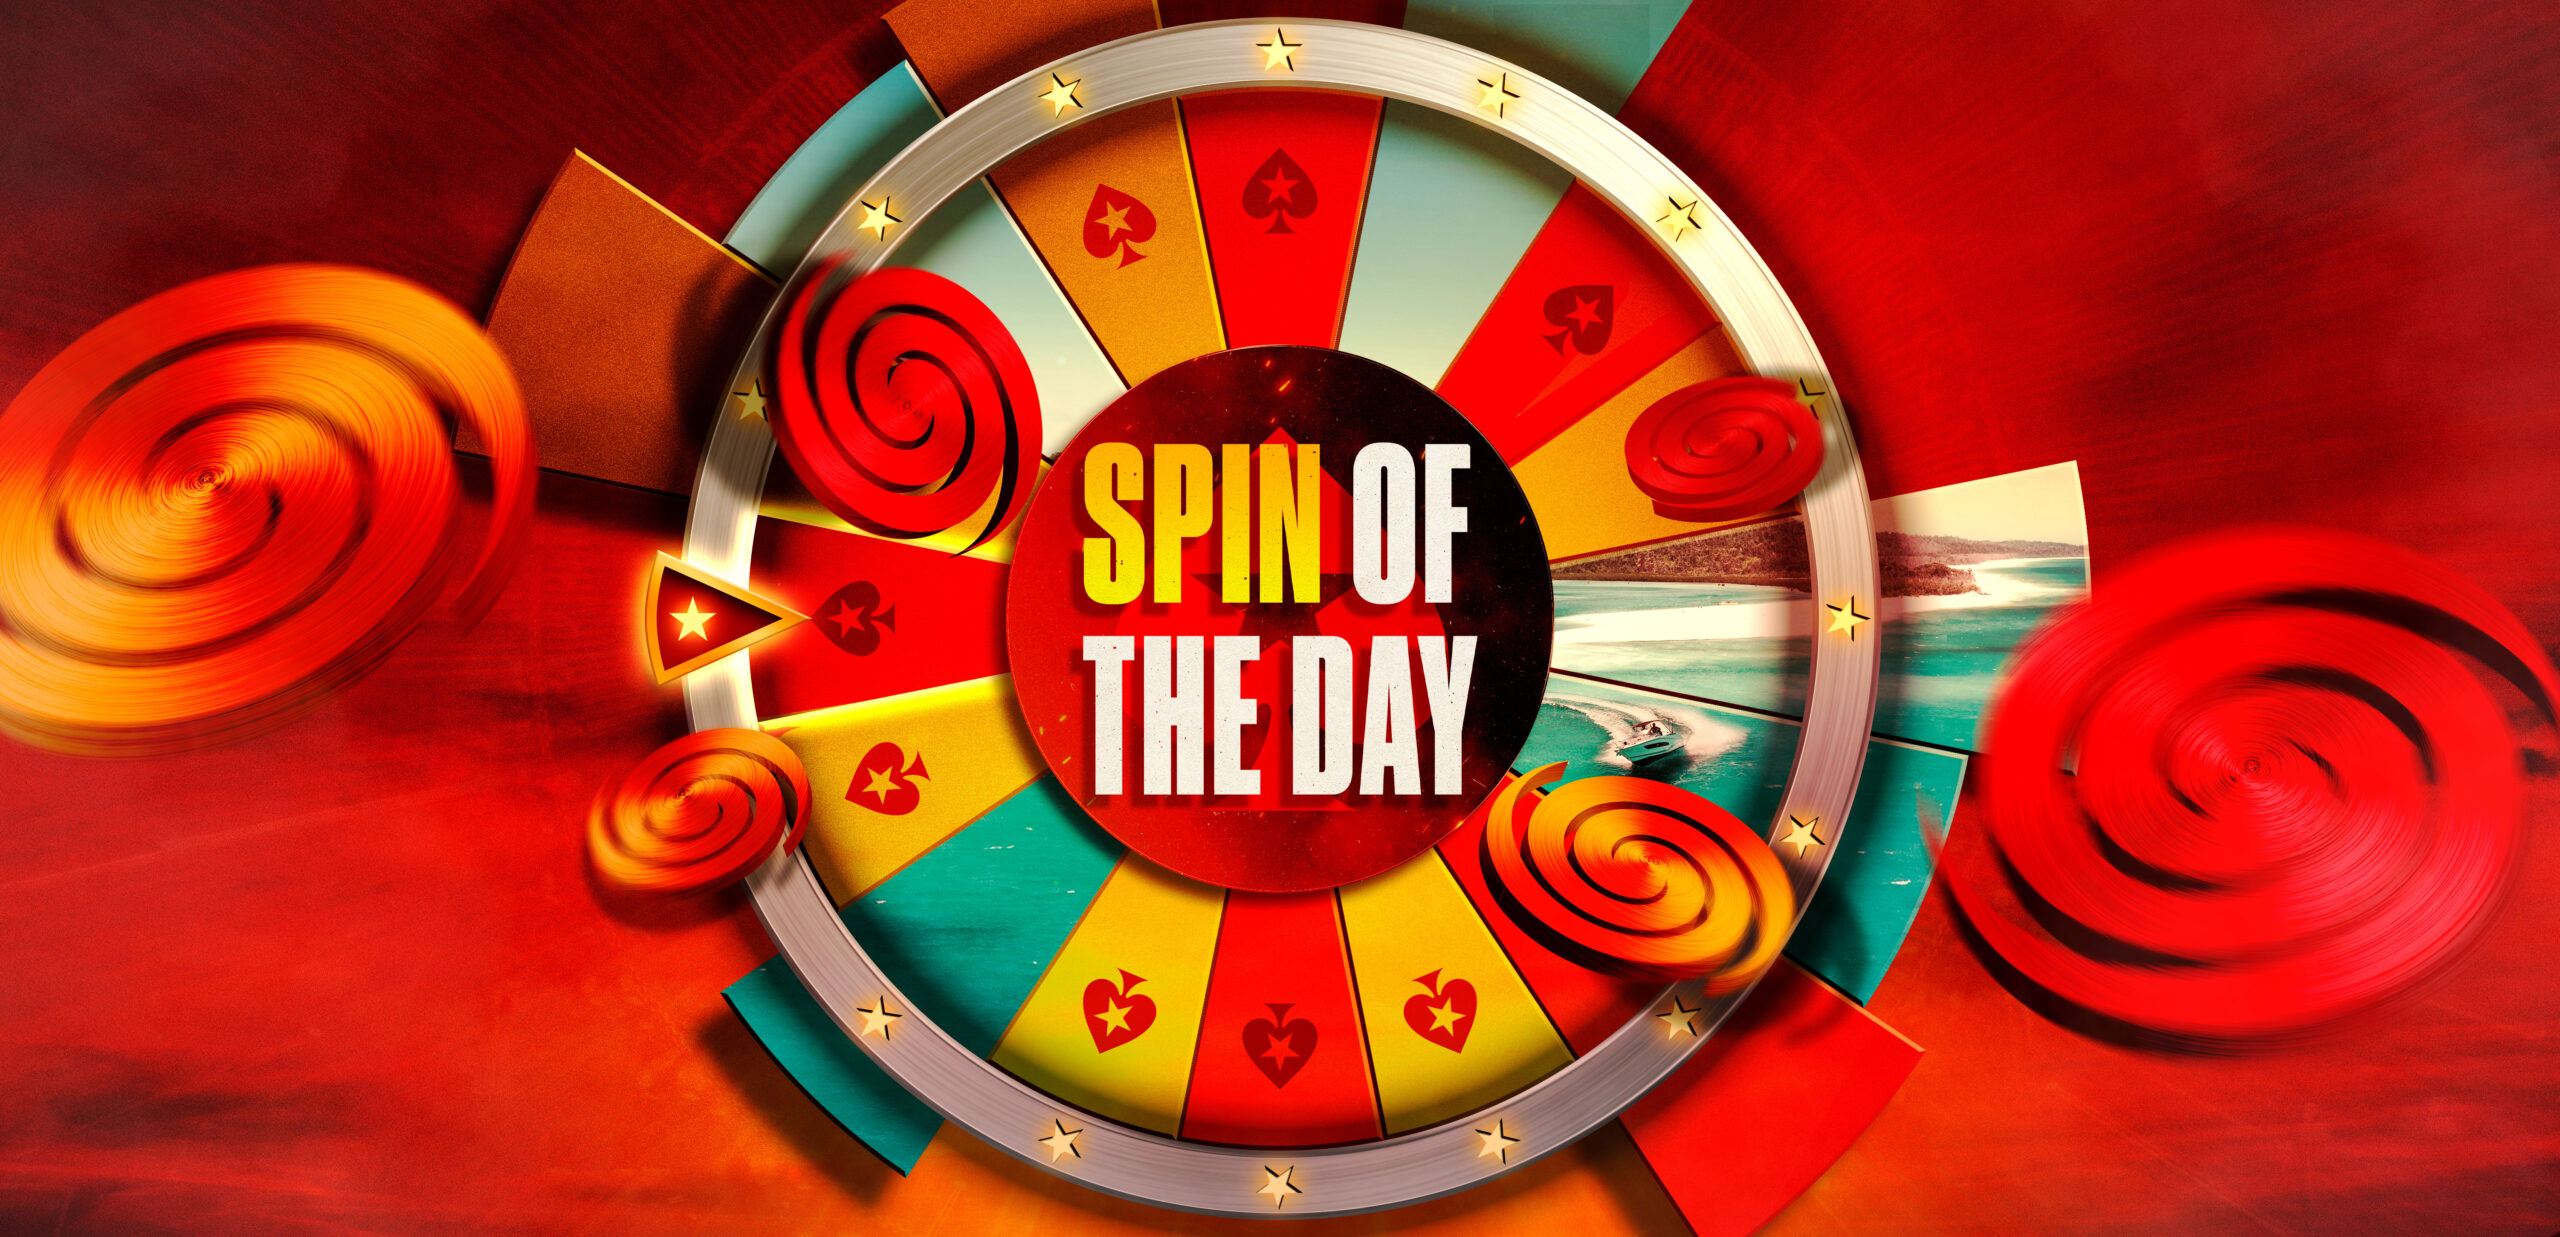 PokerStars Casino Spin of the Day promo